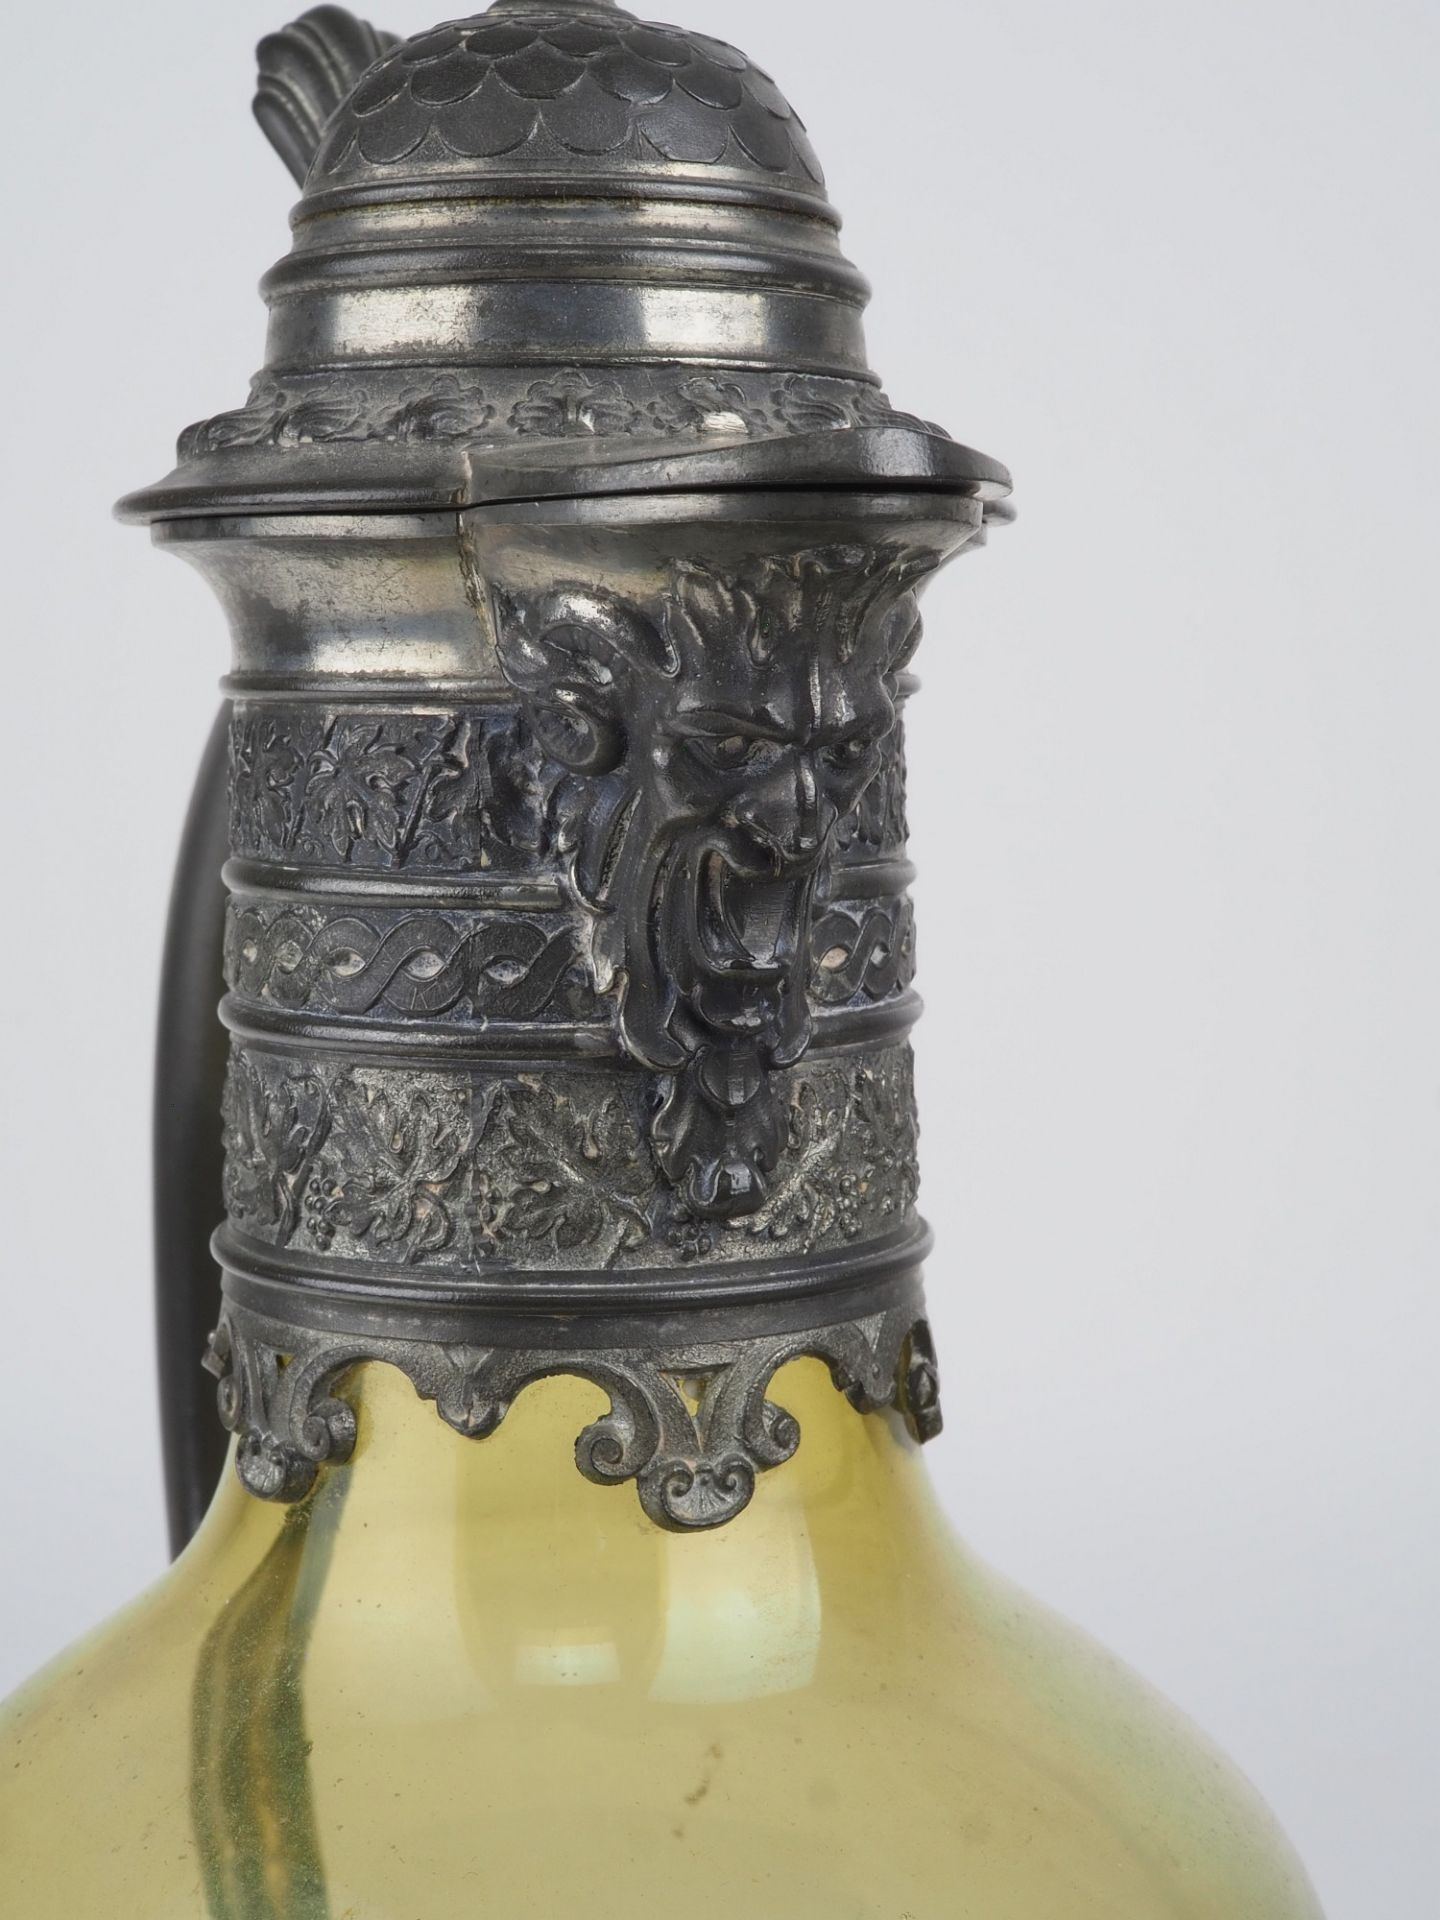 Historicist carafe, end of the 19th century - Image 3 of 3